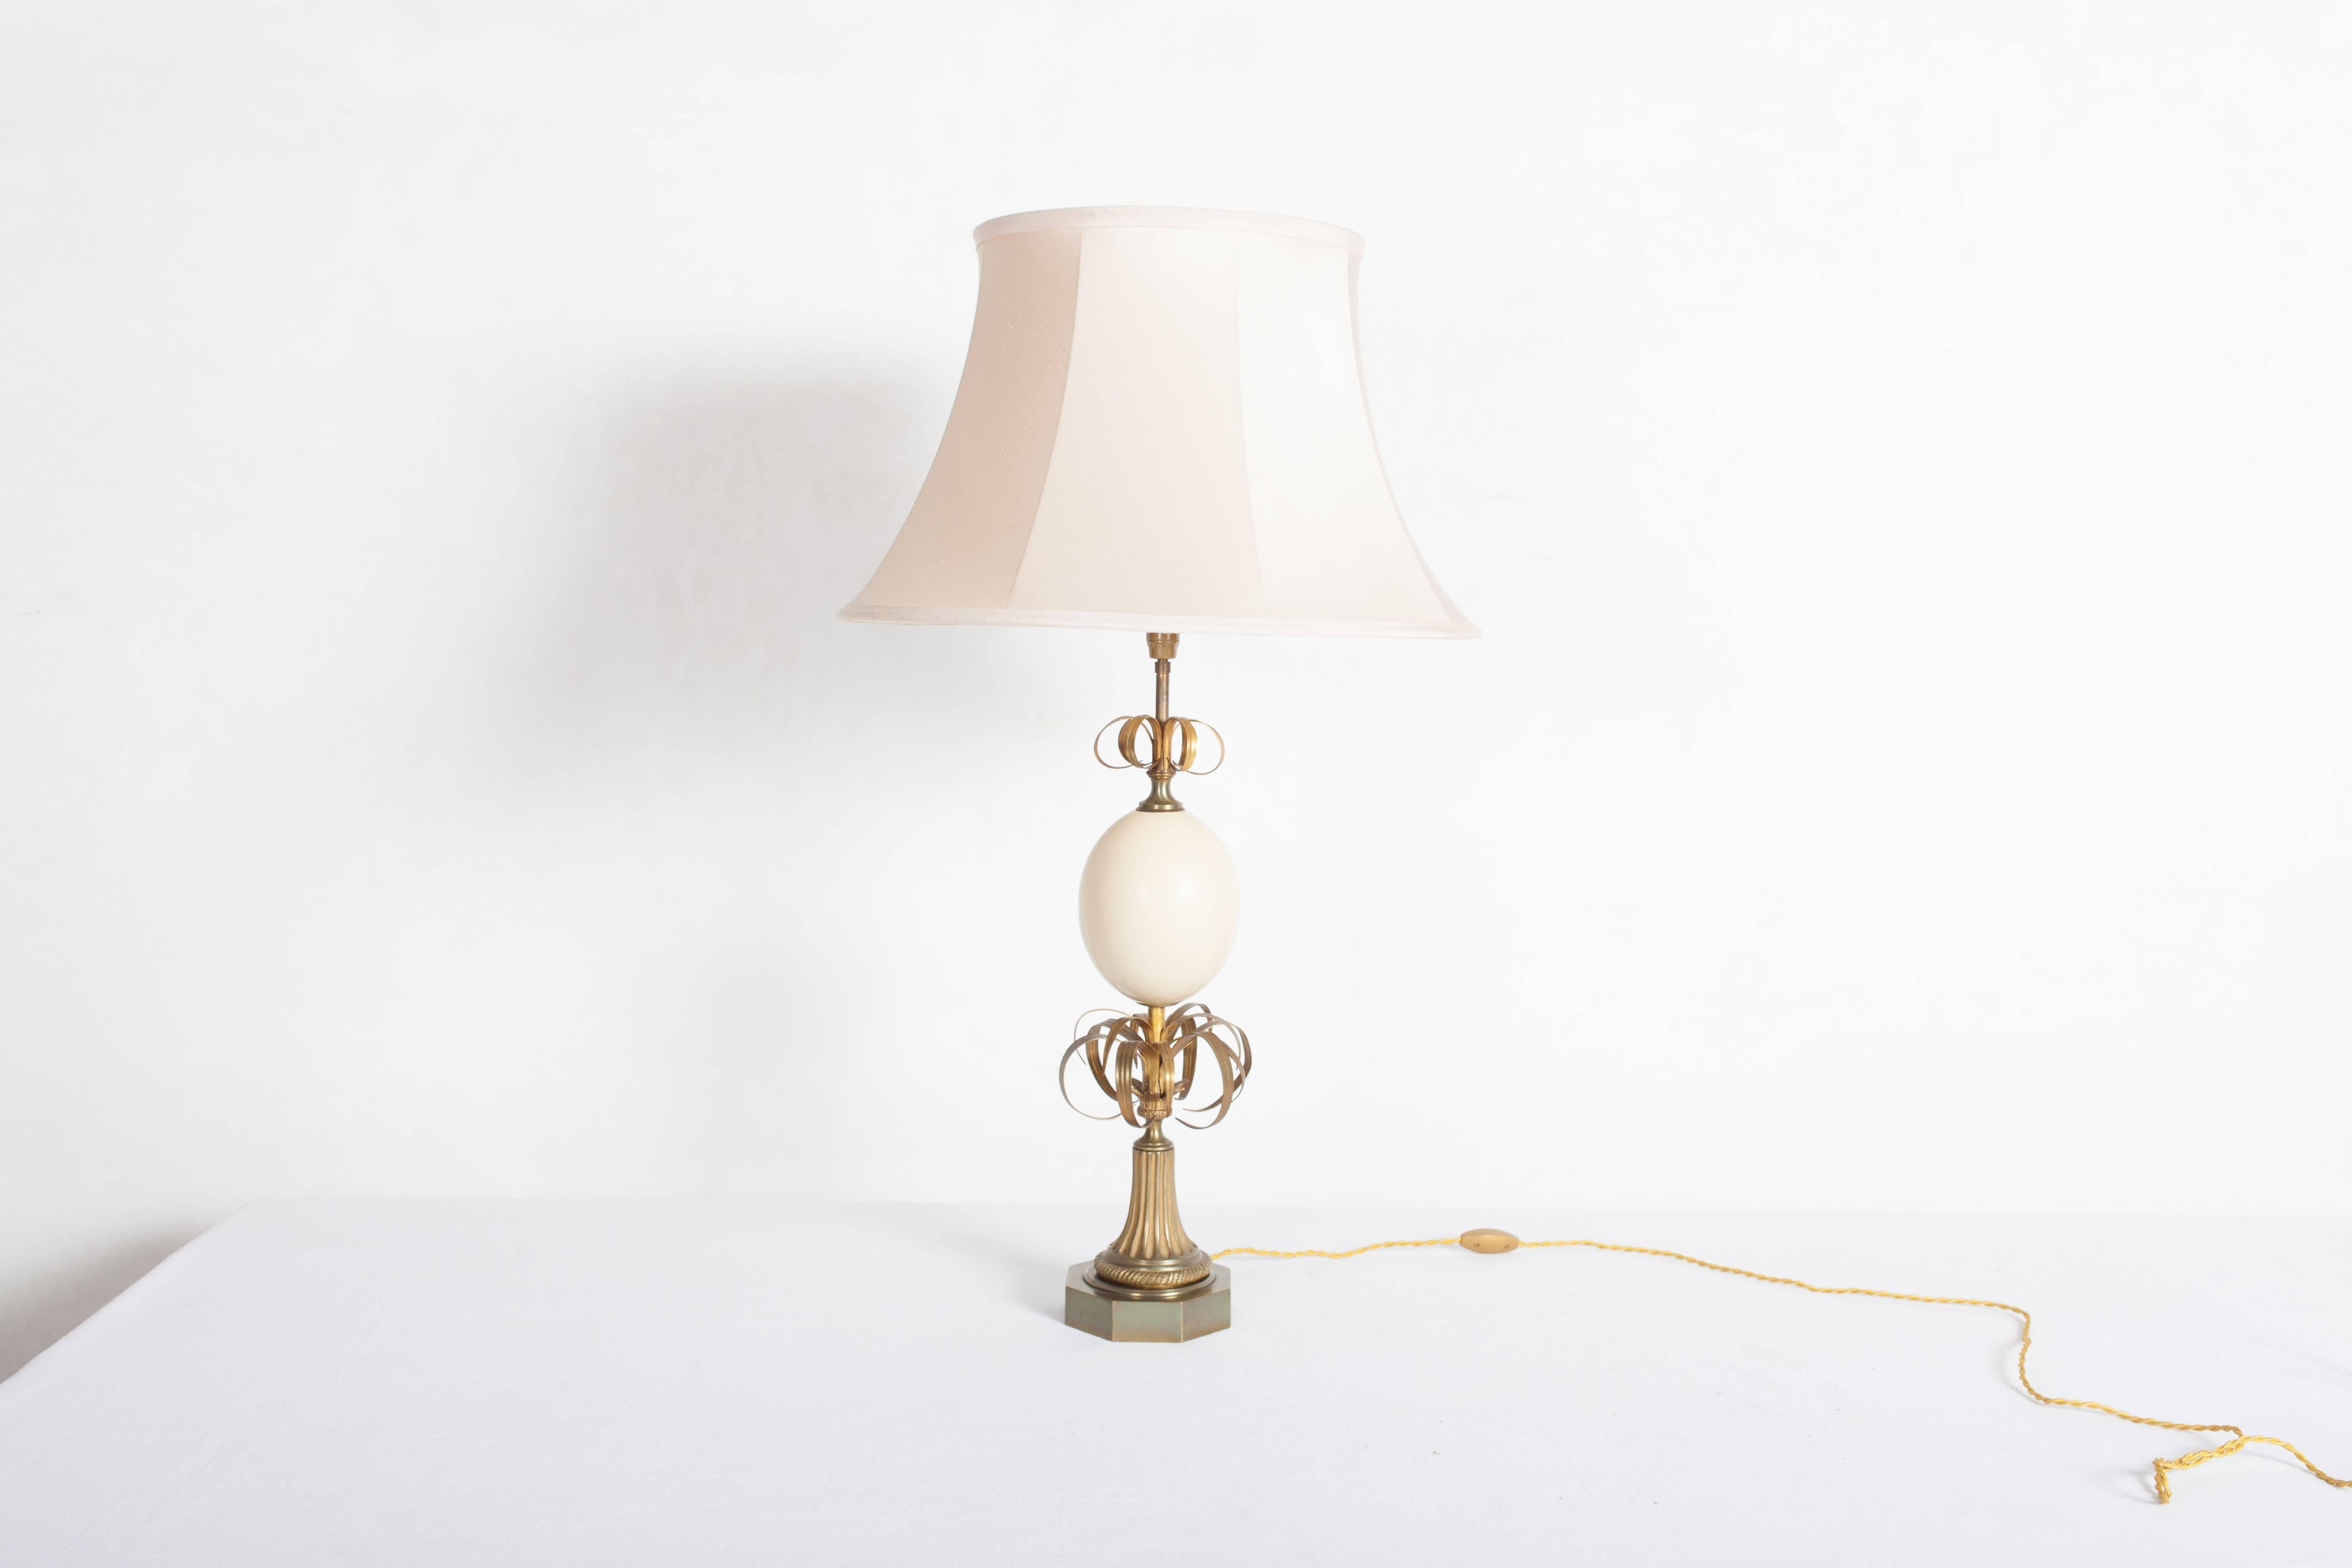 Hollywood Regency Sculptural Table Lamp by Maison Jansen, 1960s For Sale 1